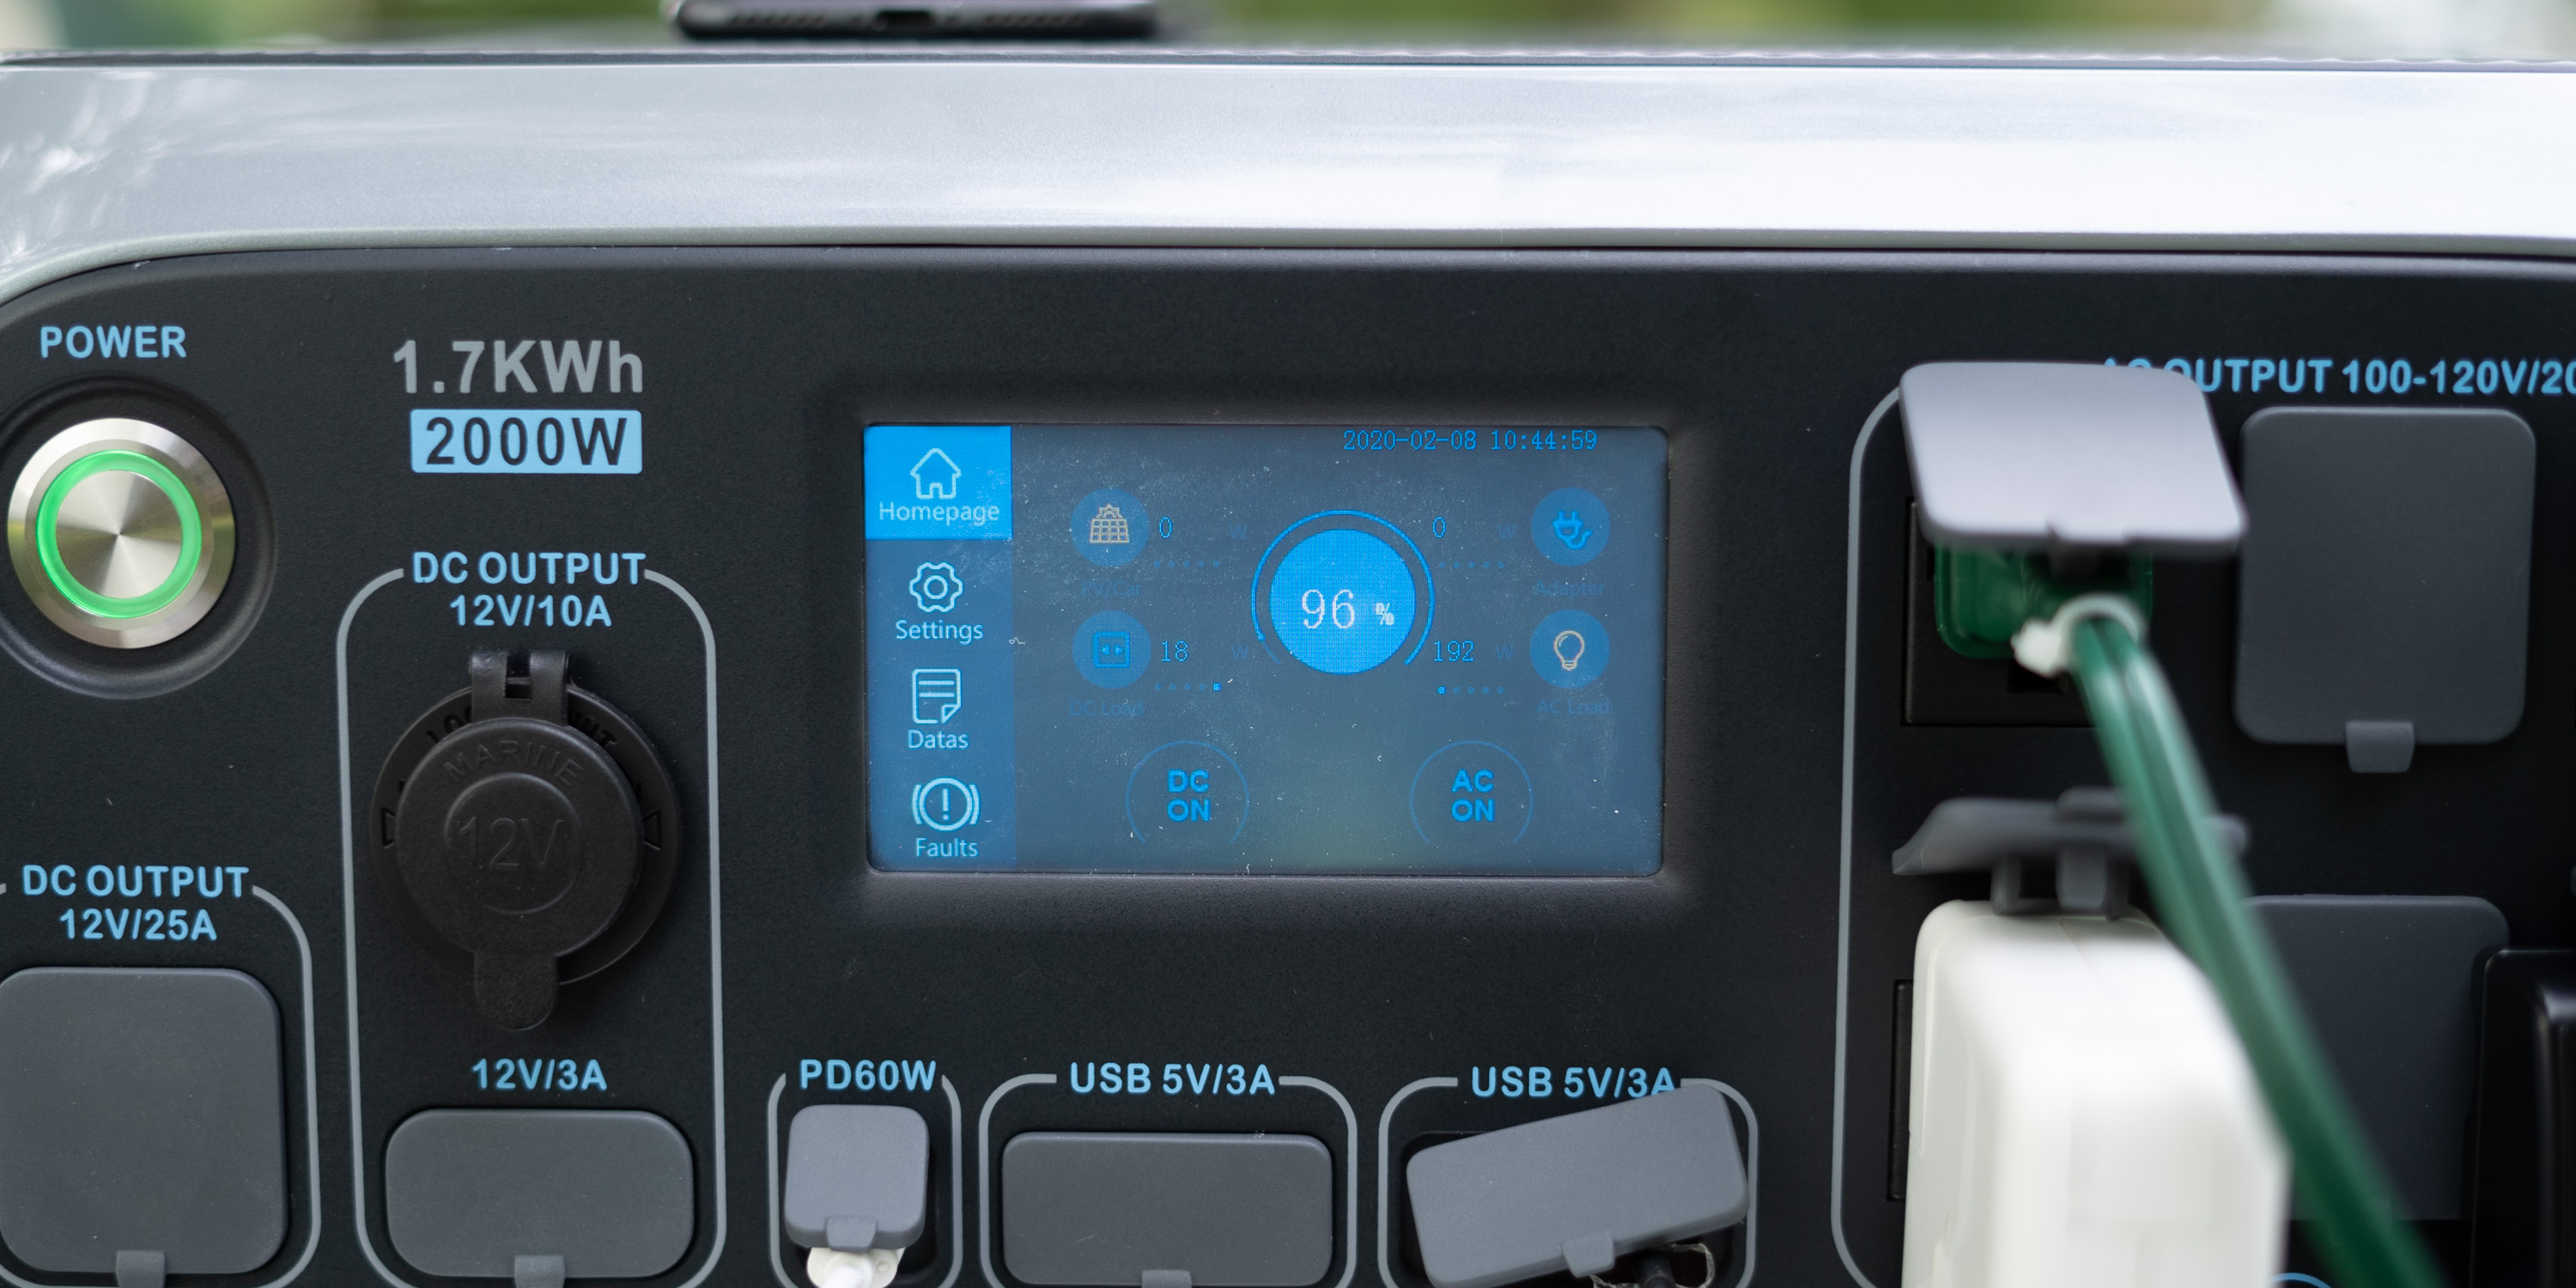 The touchscreen on the Bluetti AC200 power station 